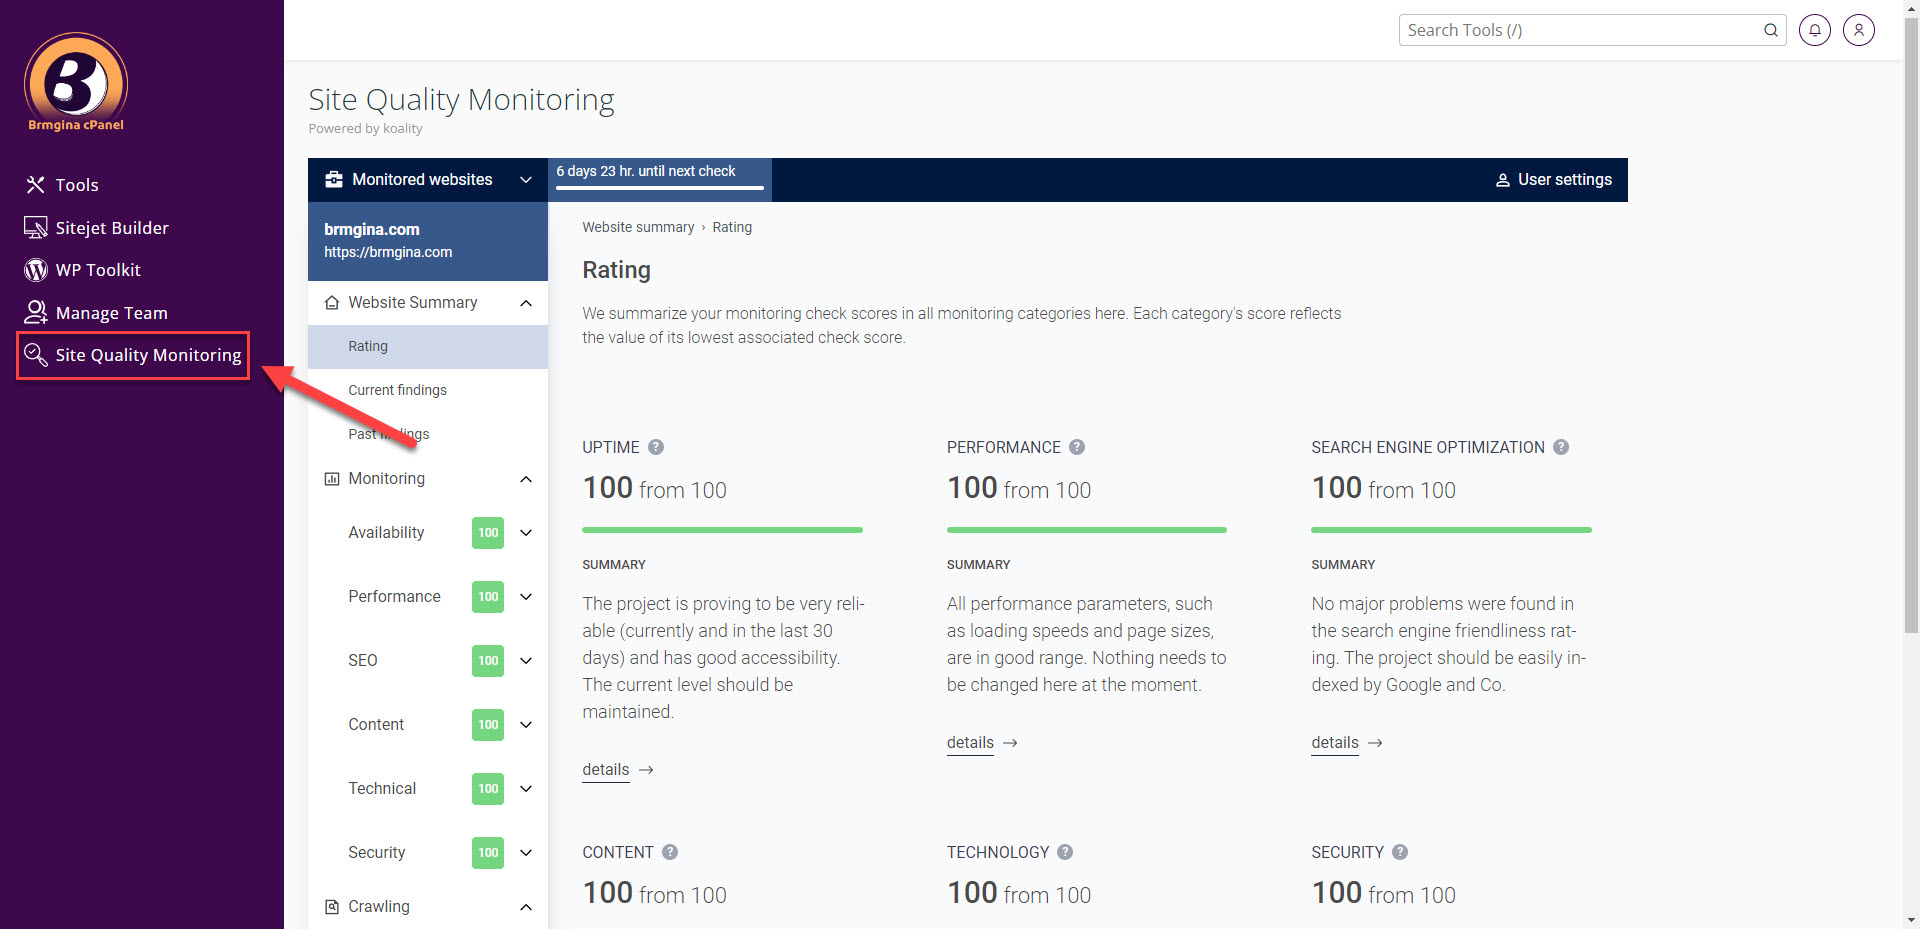 Site Quality Monitoring Option is Now Available in cPanel